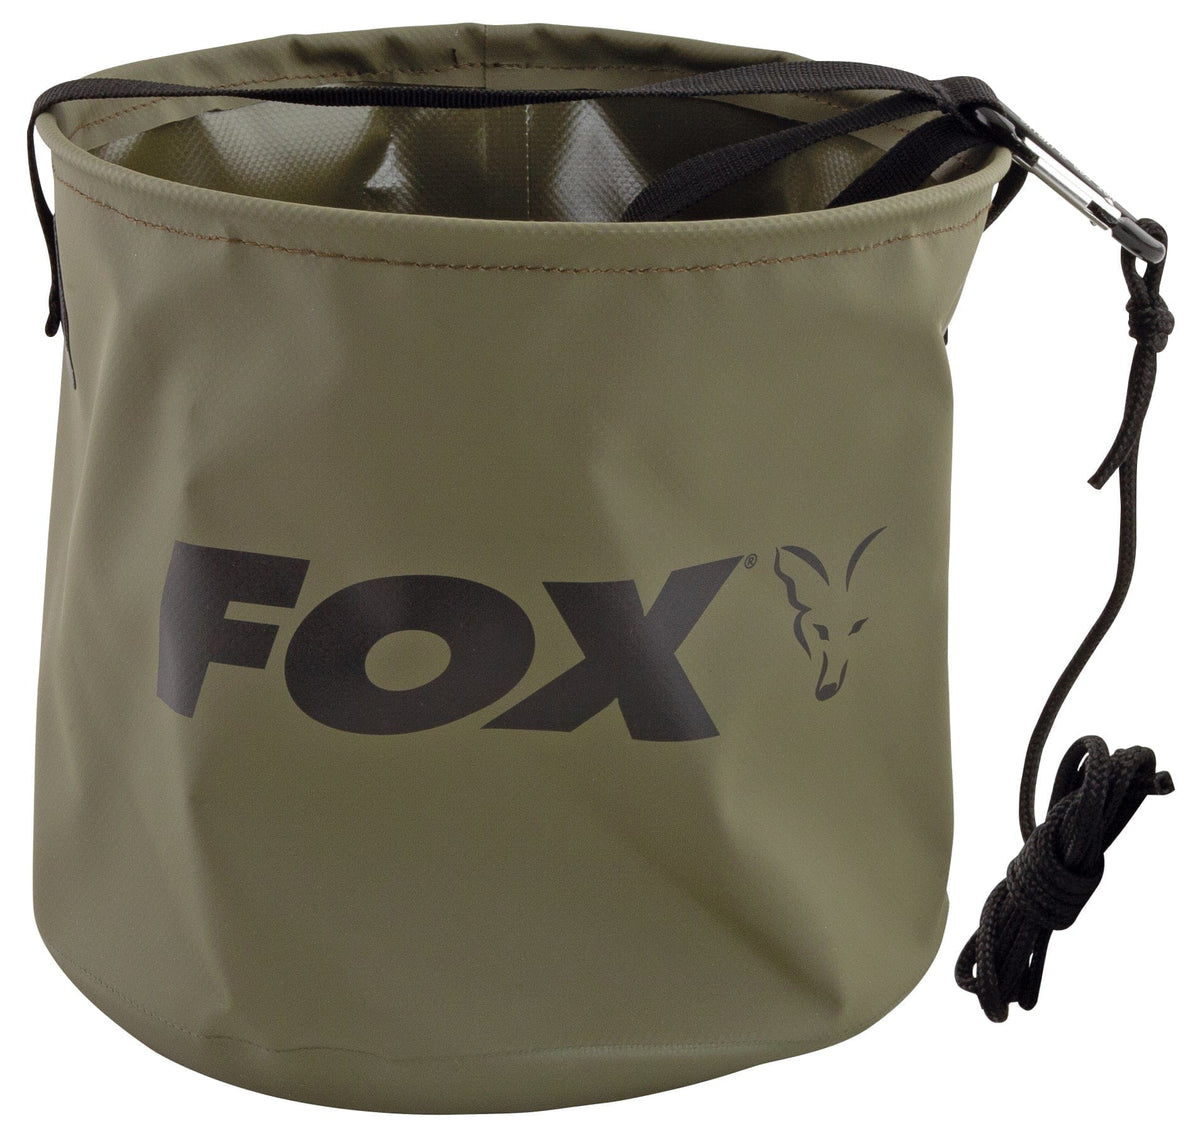 Fox Collapsable Water Bucket including rope /clip - 2 Sizes.